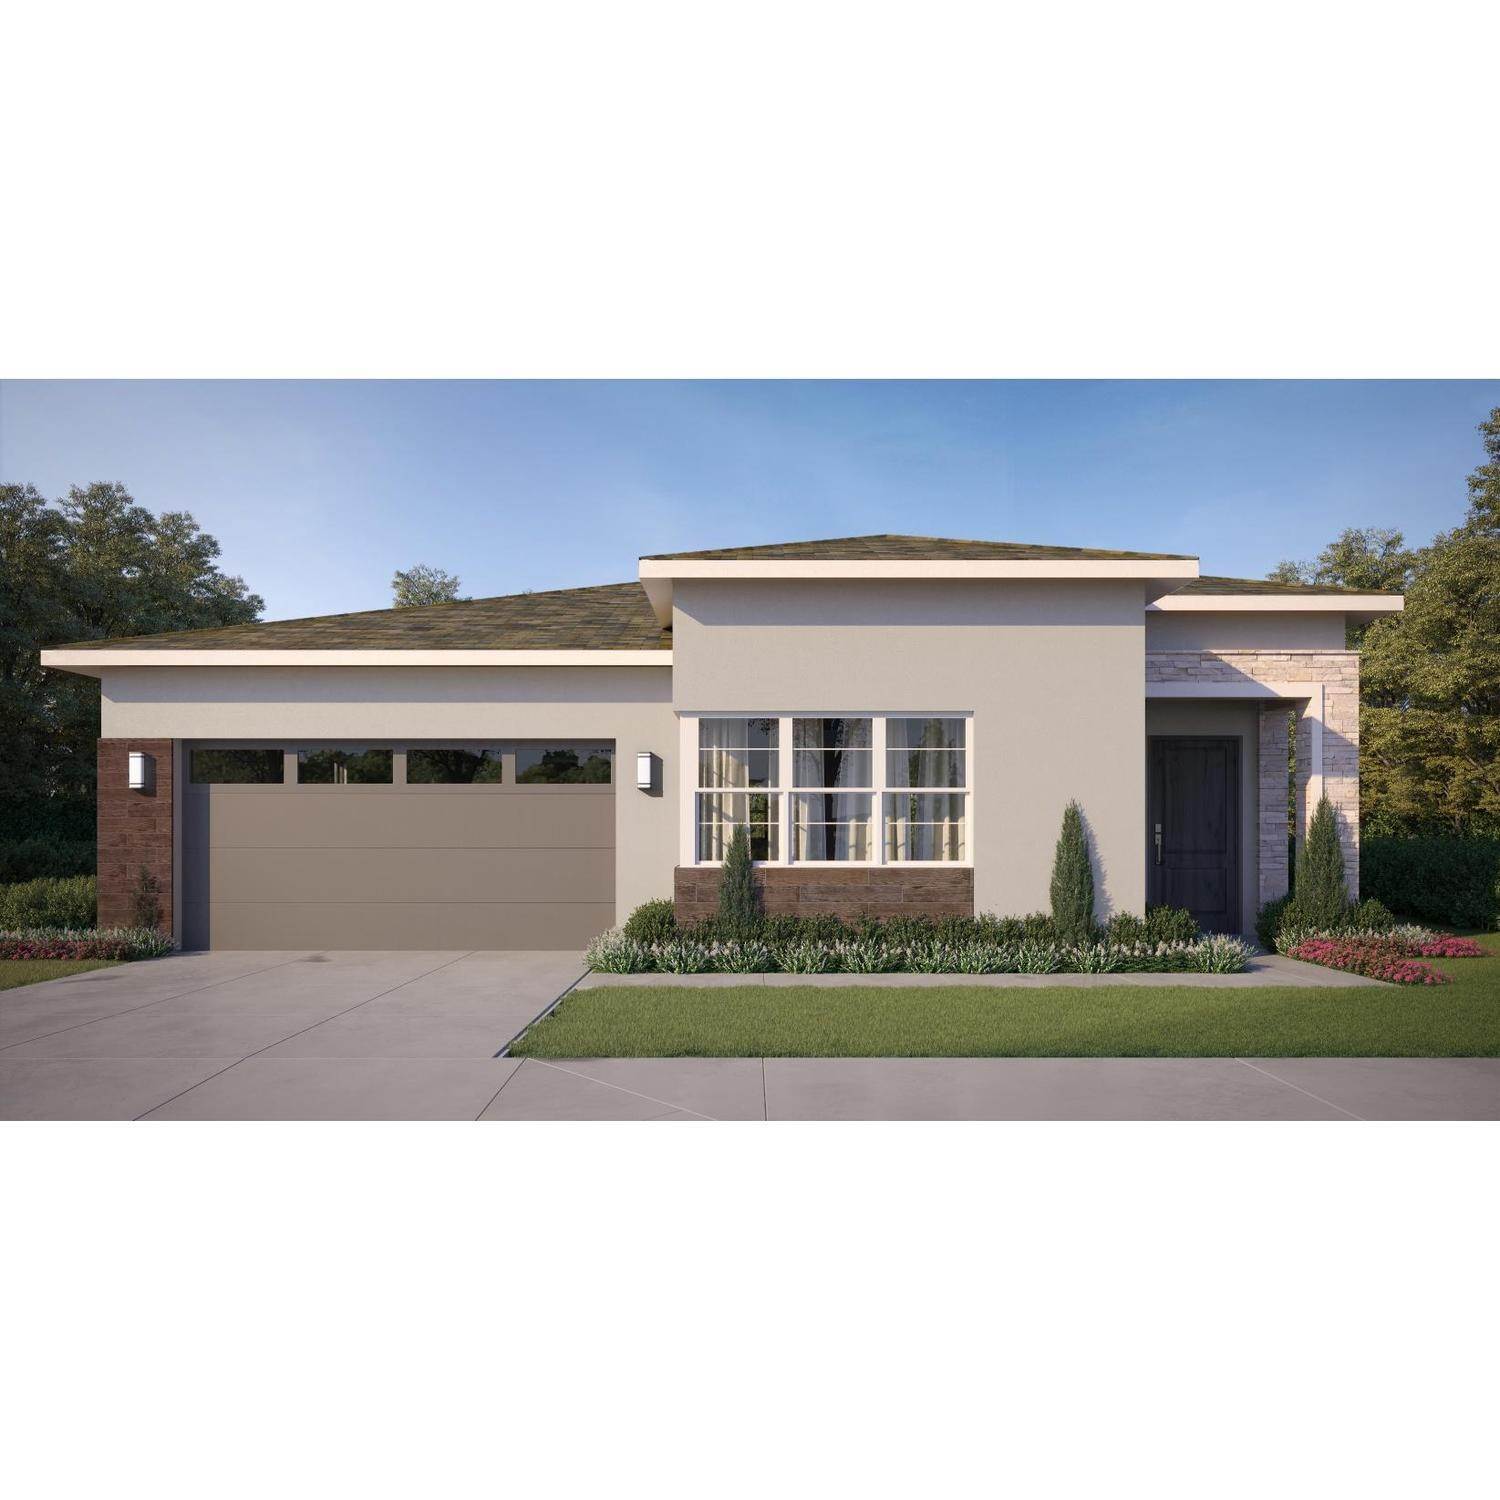 Single Family for Sale at Folsom, CA 95630